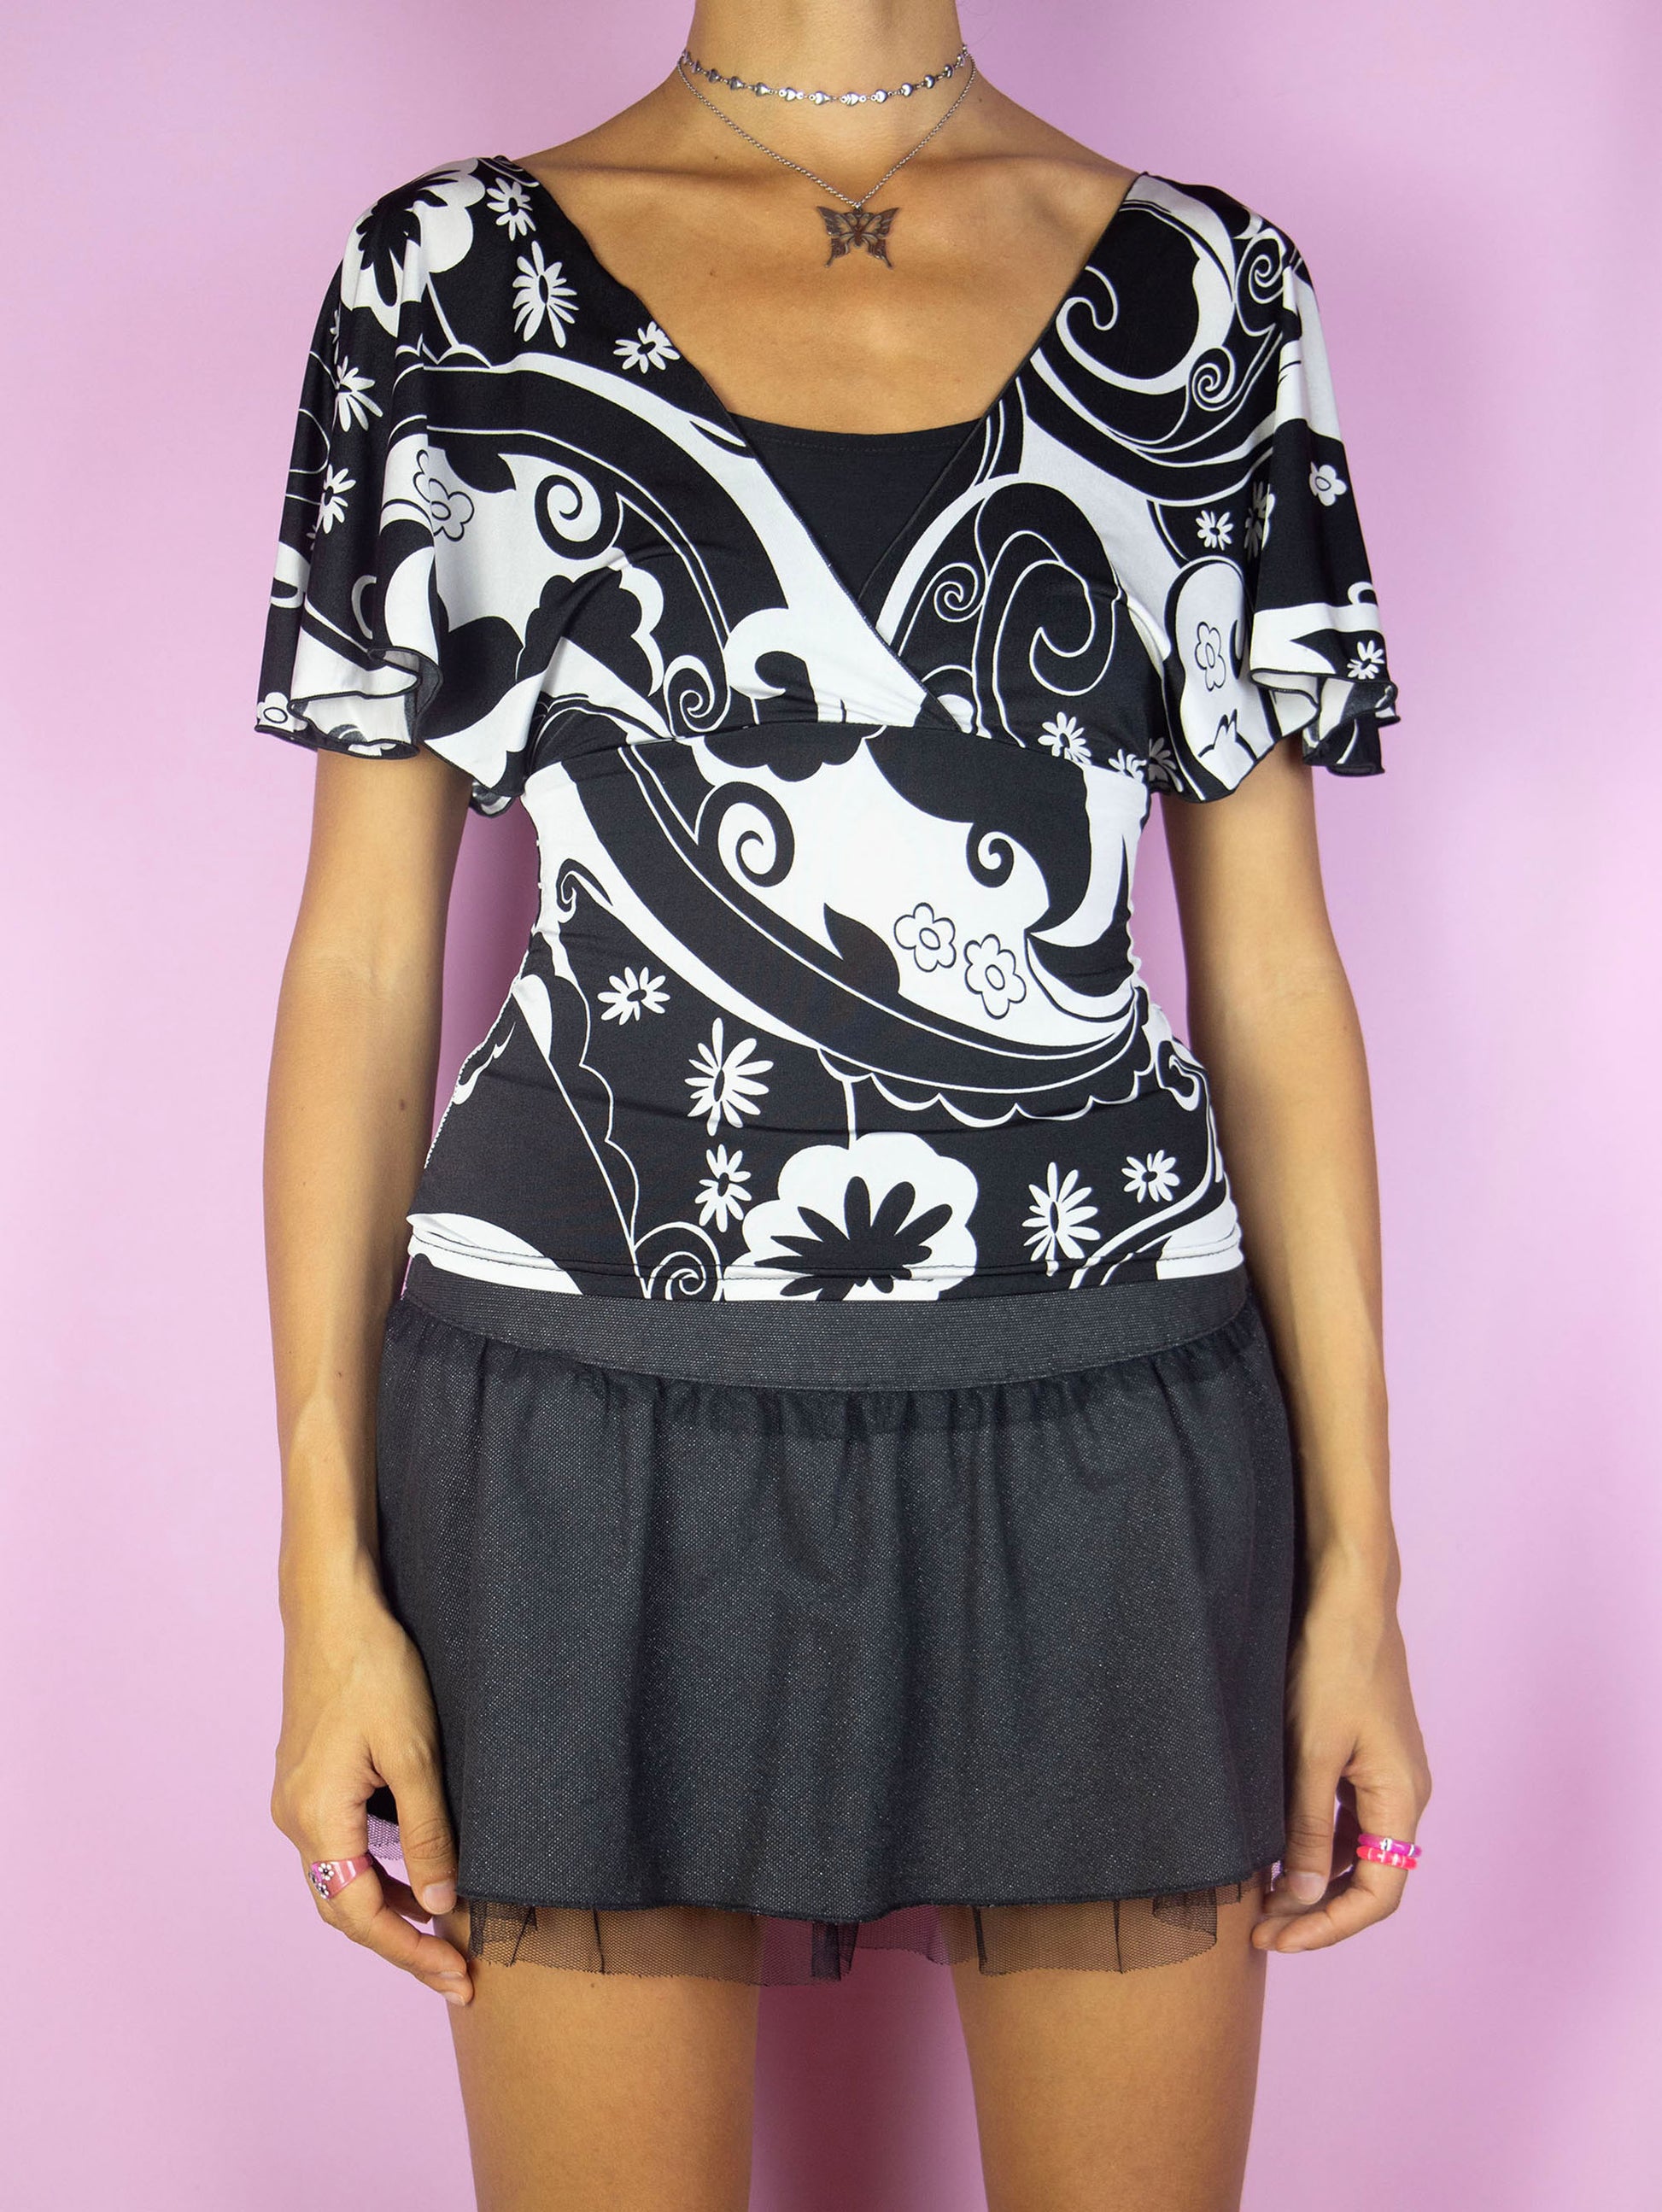 The Y2K Black Graphic Wrap Top is a vintage black and white abstract floral print short sleeve top. Cyber 2000s summer blouse.